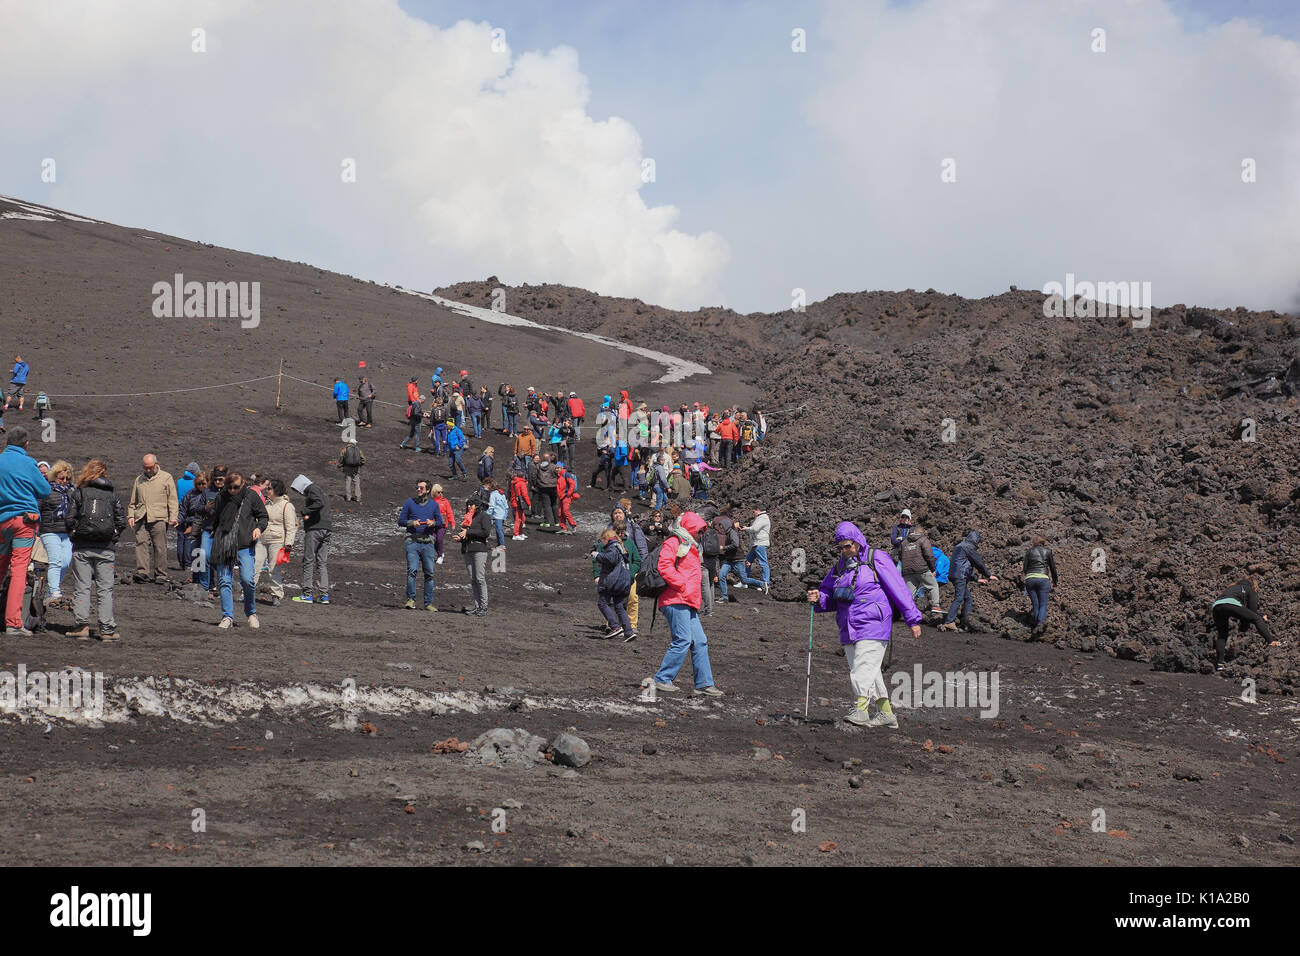 Sicily, tourist group in the volcano landscape at Etna Stock Photo